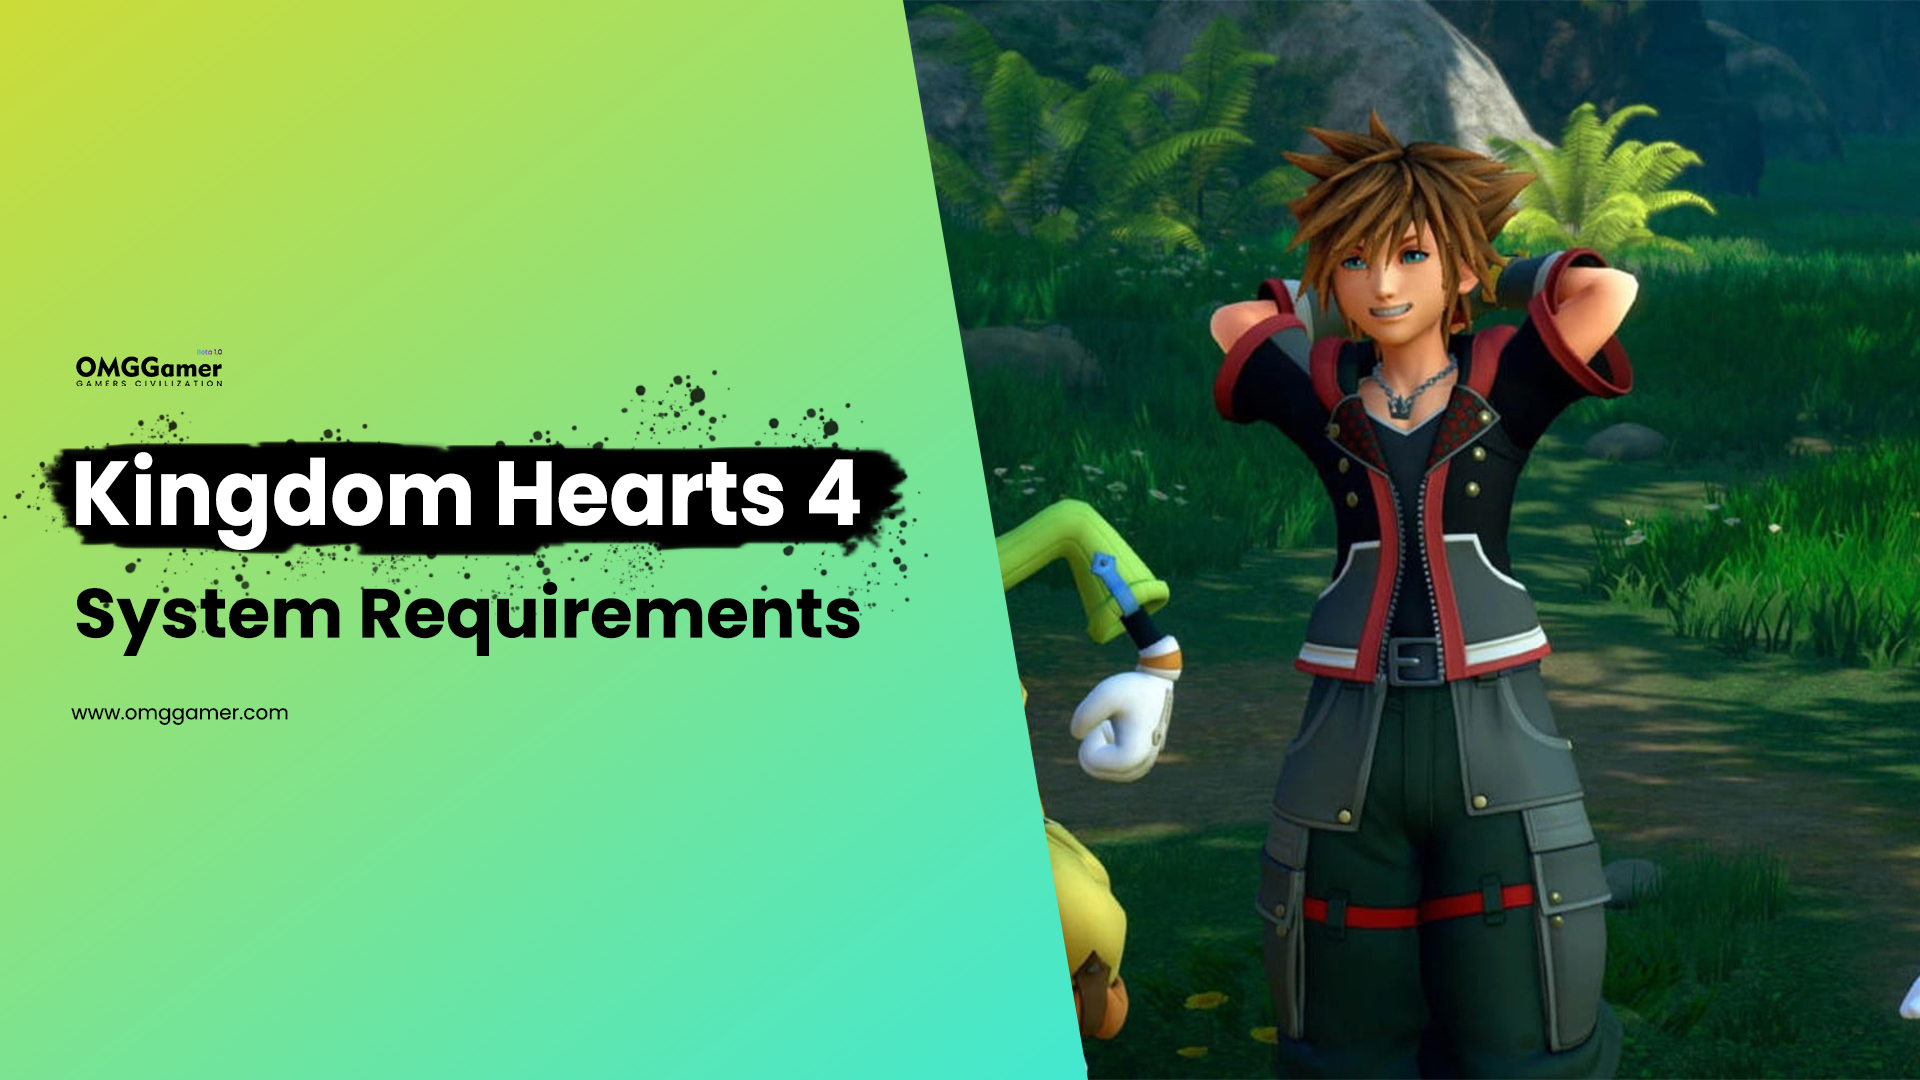 Kingdom Hearts 4 System Requirements